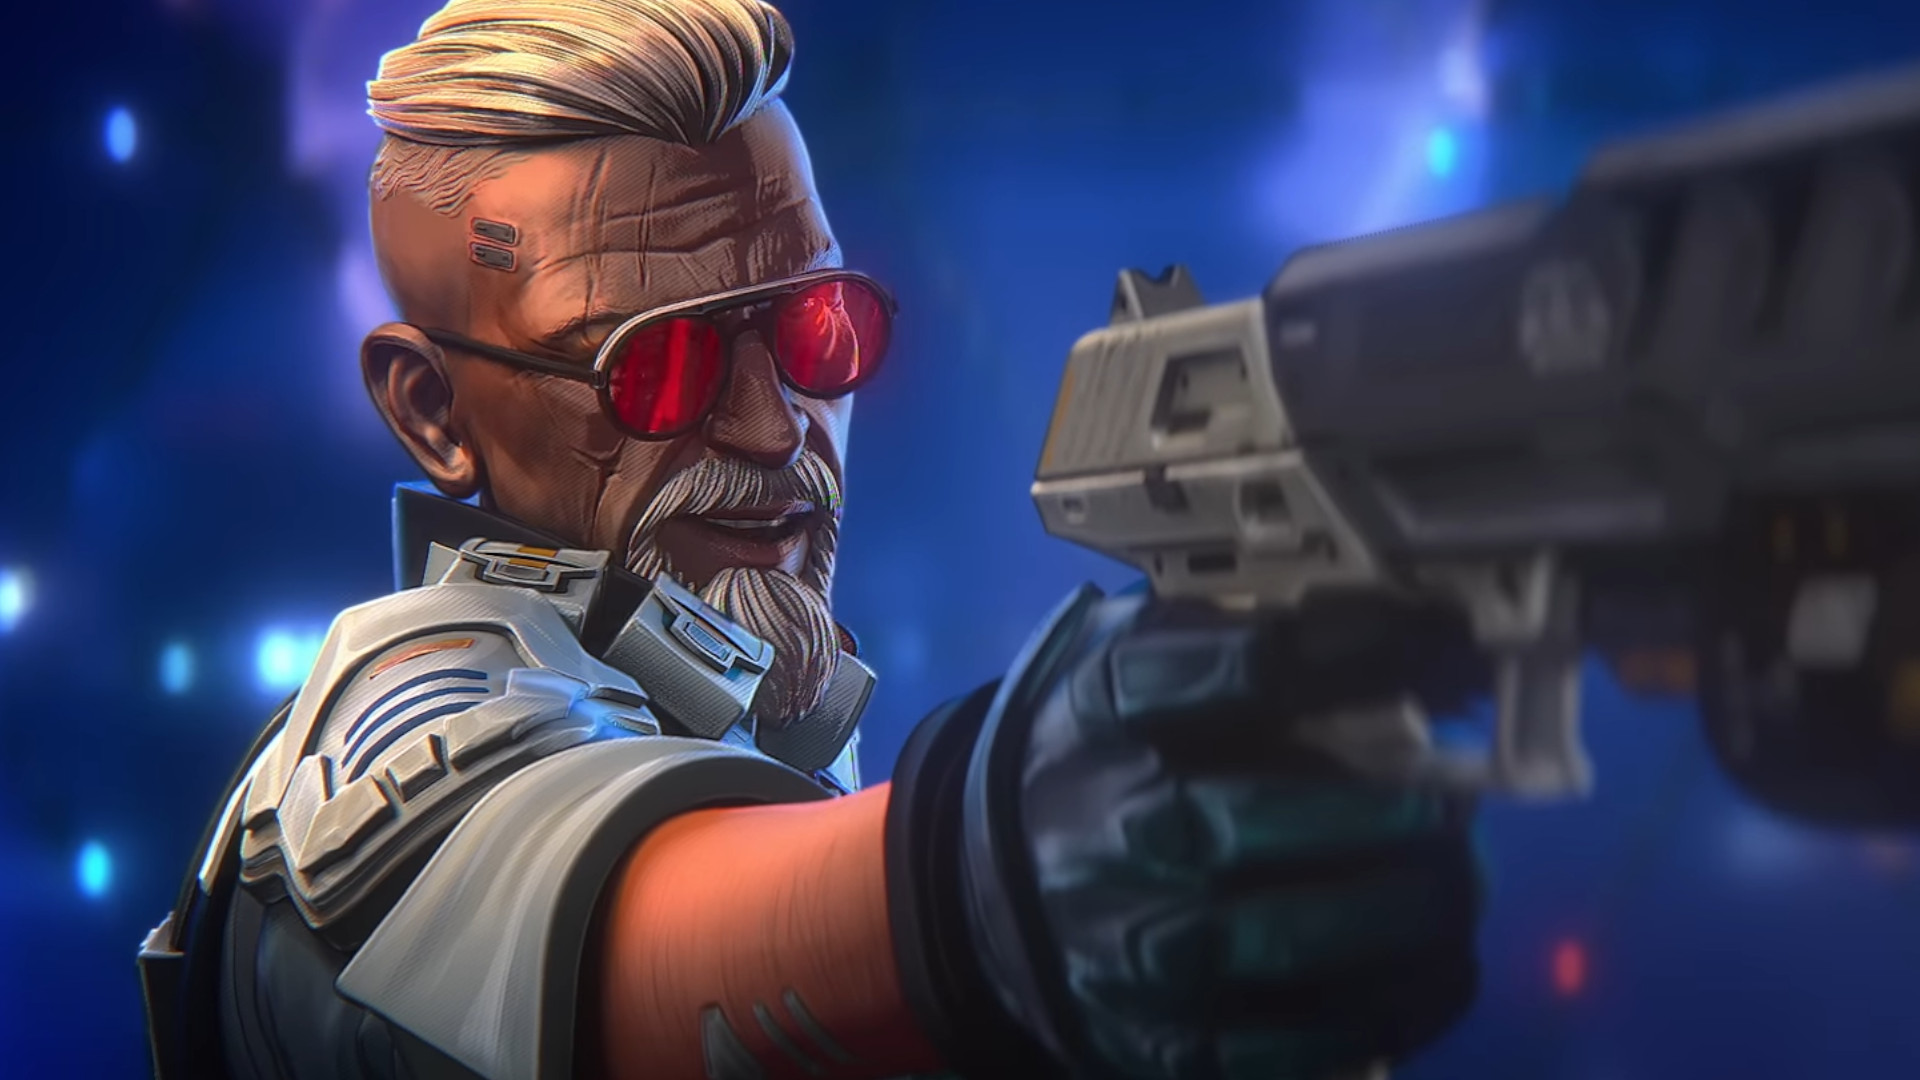 New Apex Legends character Ballistic is a terrible father murdering everyone to protect his son GamesRadar+